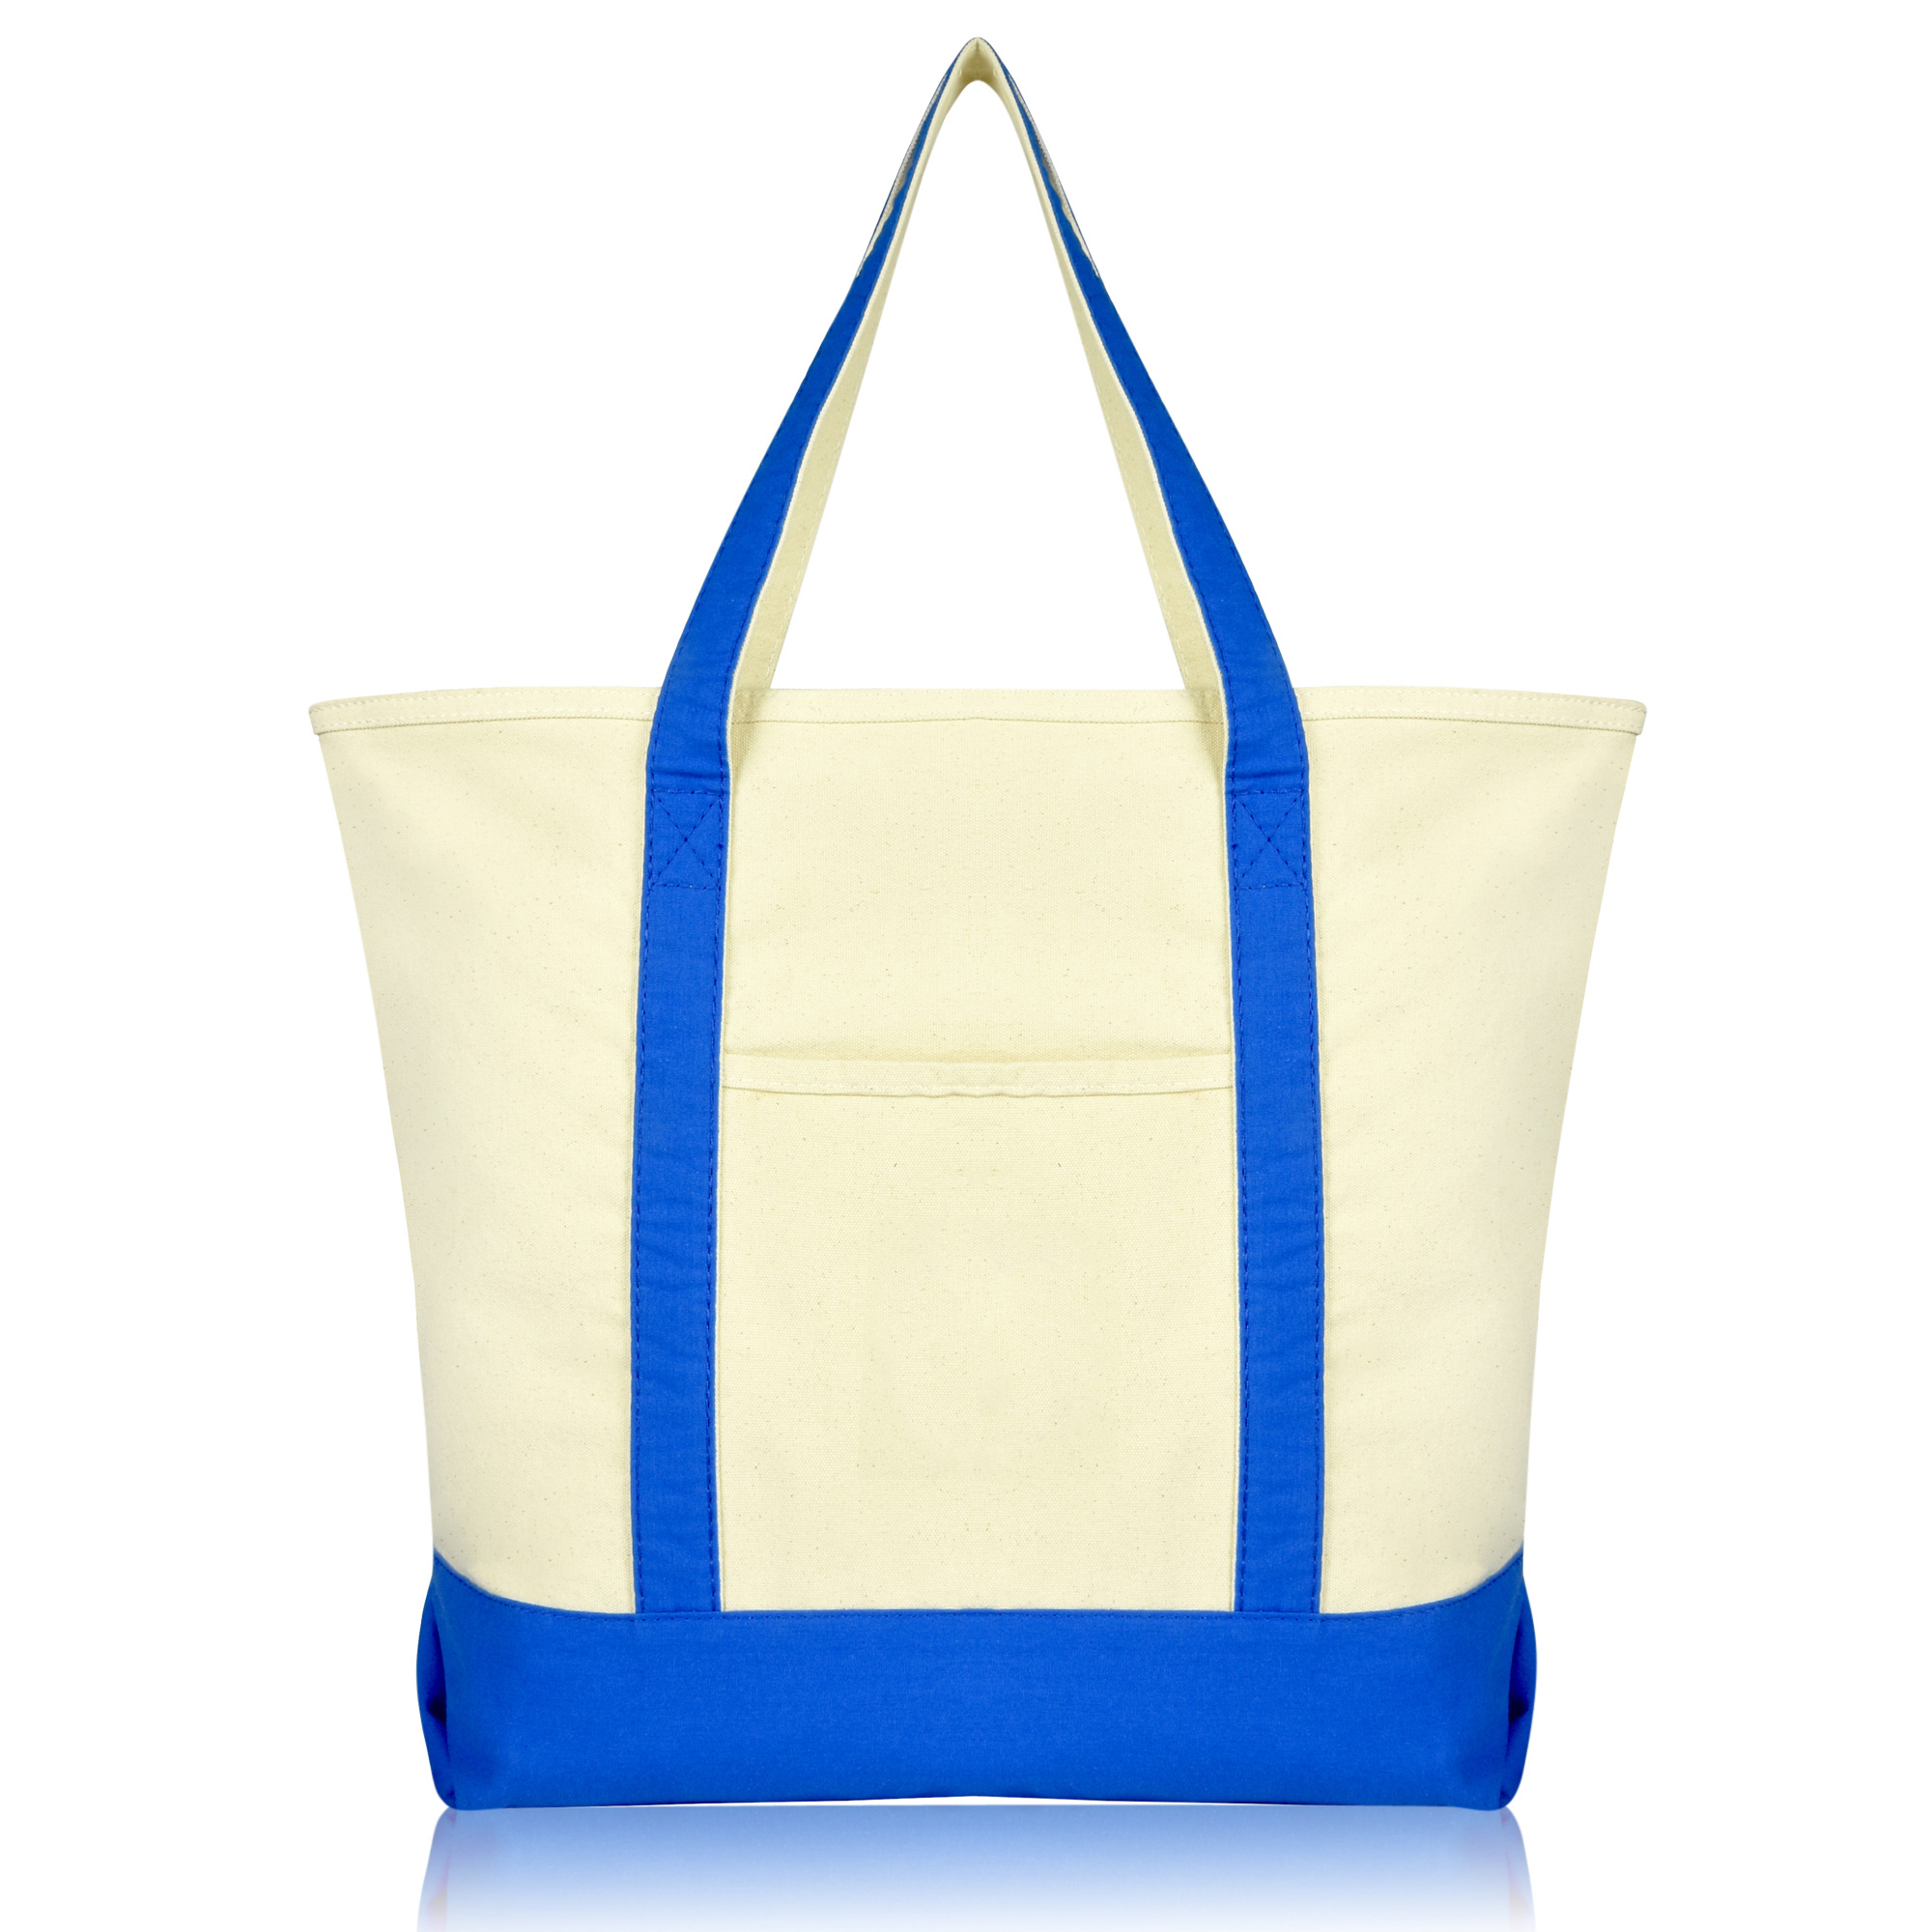 DALIX 22" Extra Large Cotton Canvas Zippered Shopping Tote Grocery Bag in Royal Blue - image 1 of 6